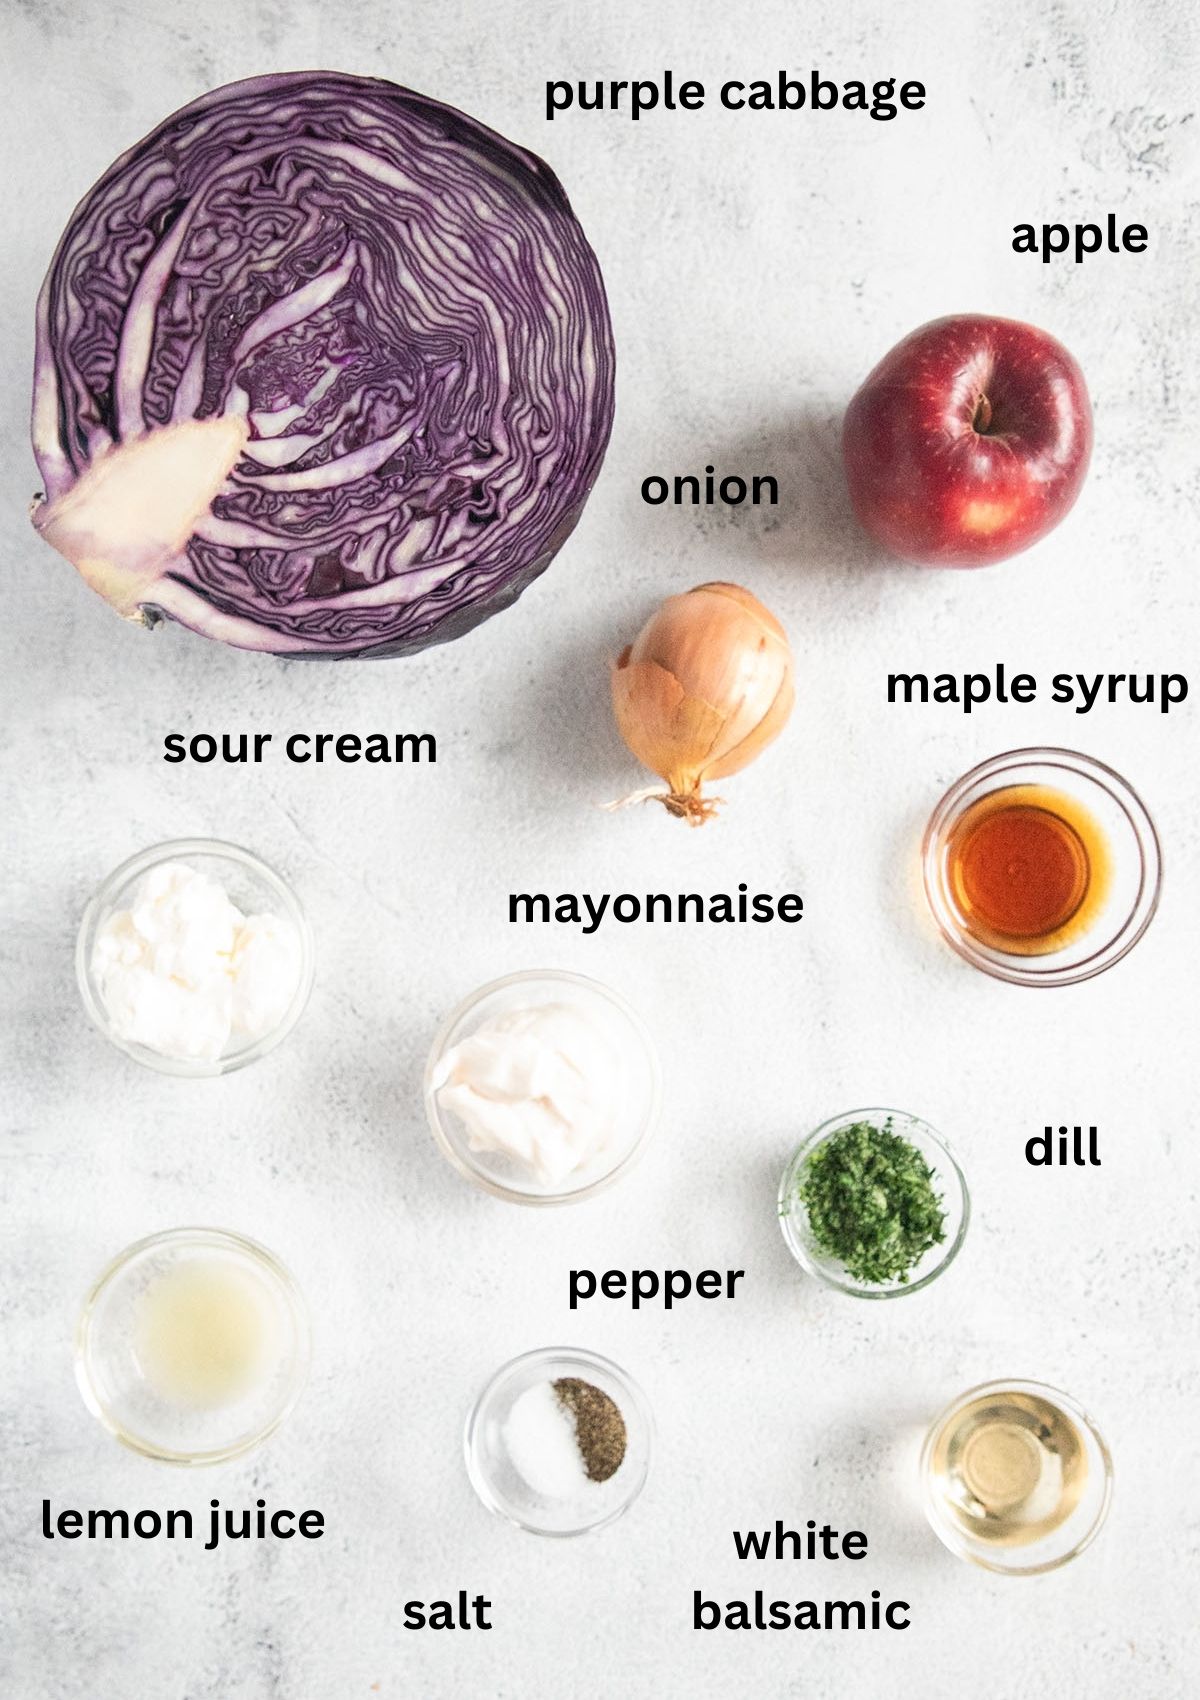 labeled ingredients for making slaw with purple cabbage, apple, onion, dill and sour cream.